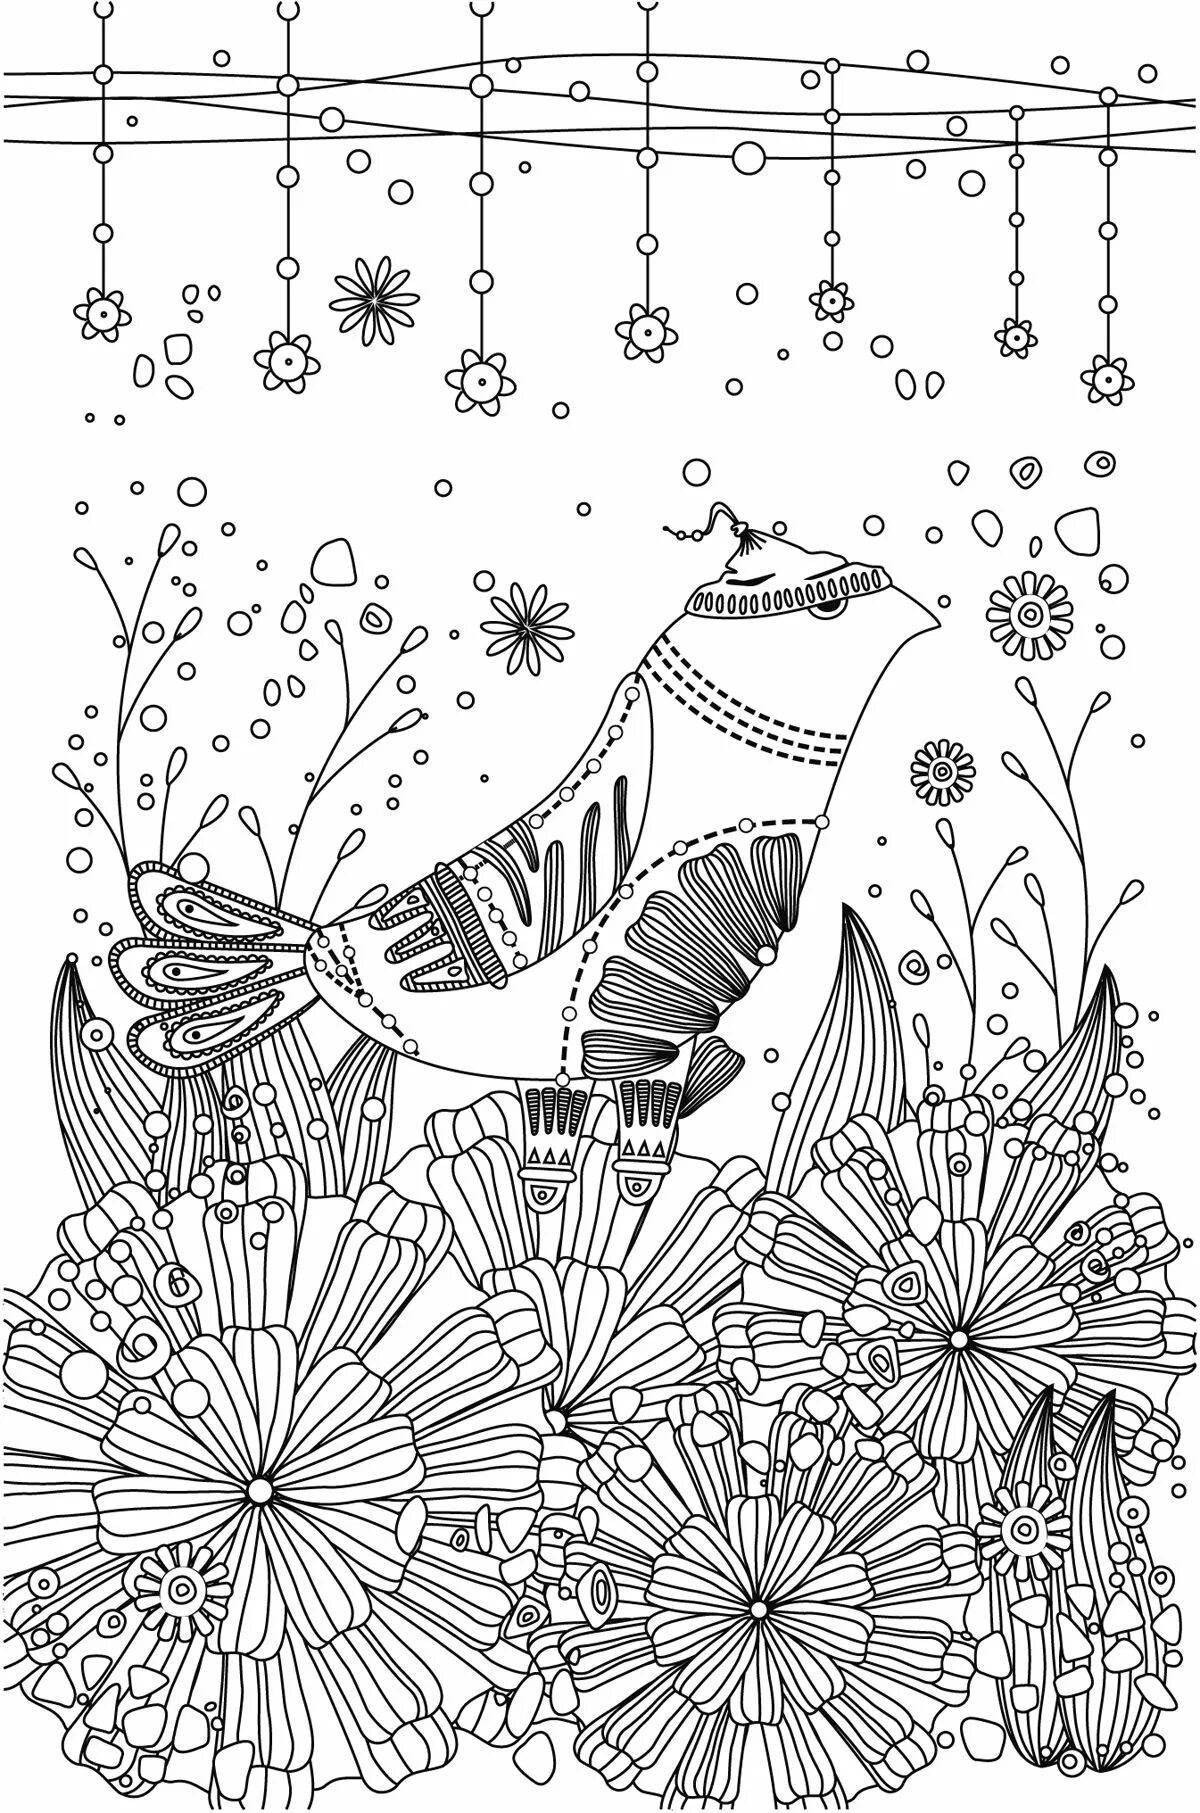 Great zendoodle coloring book